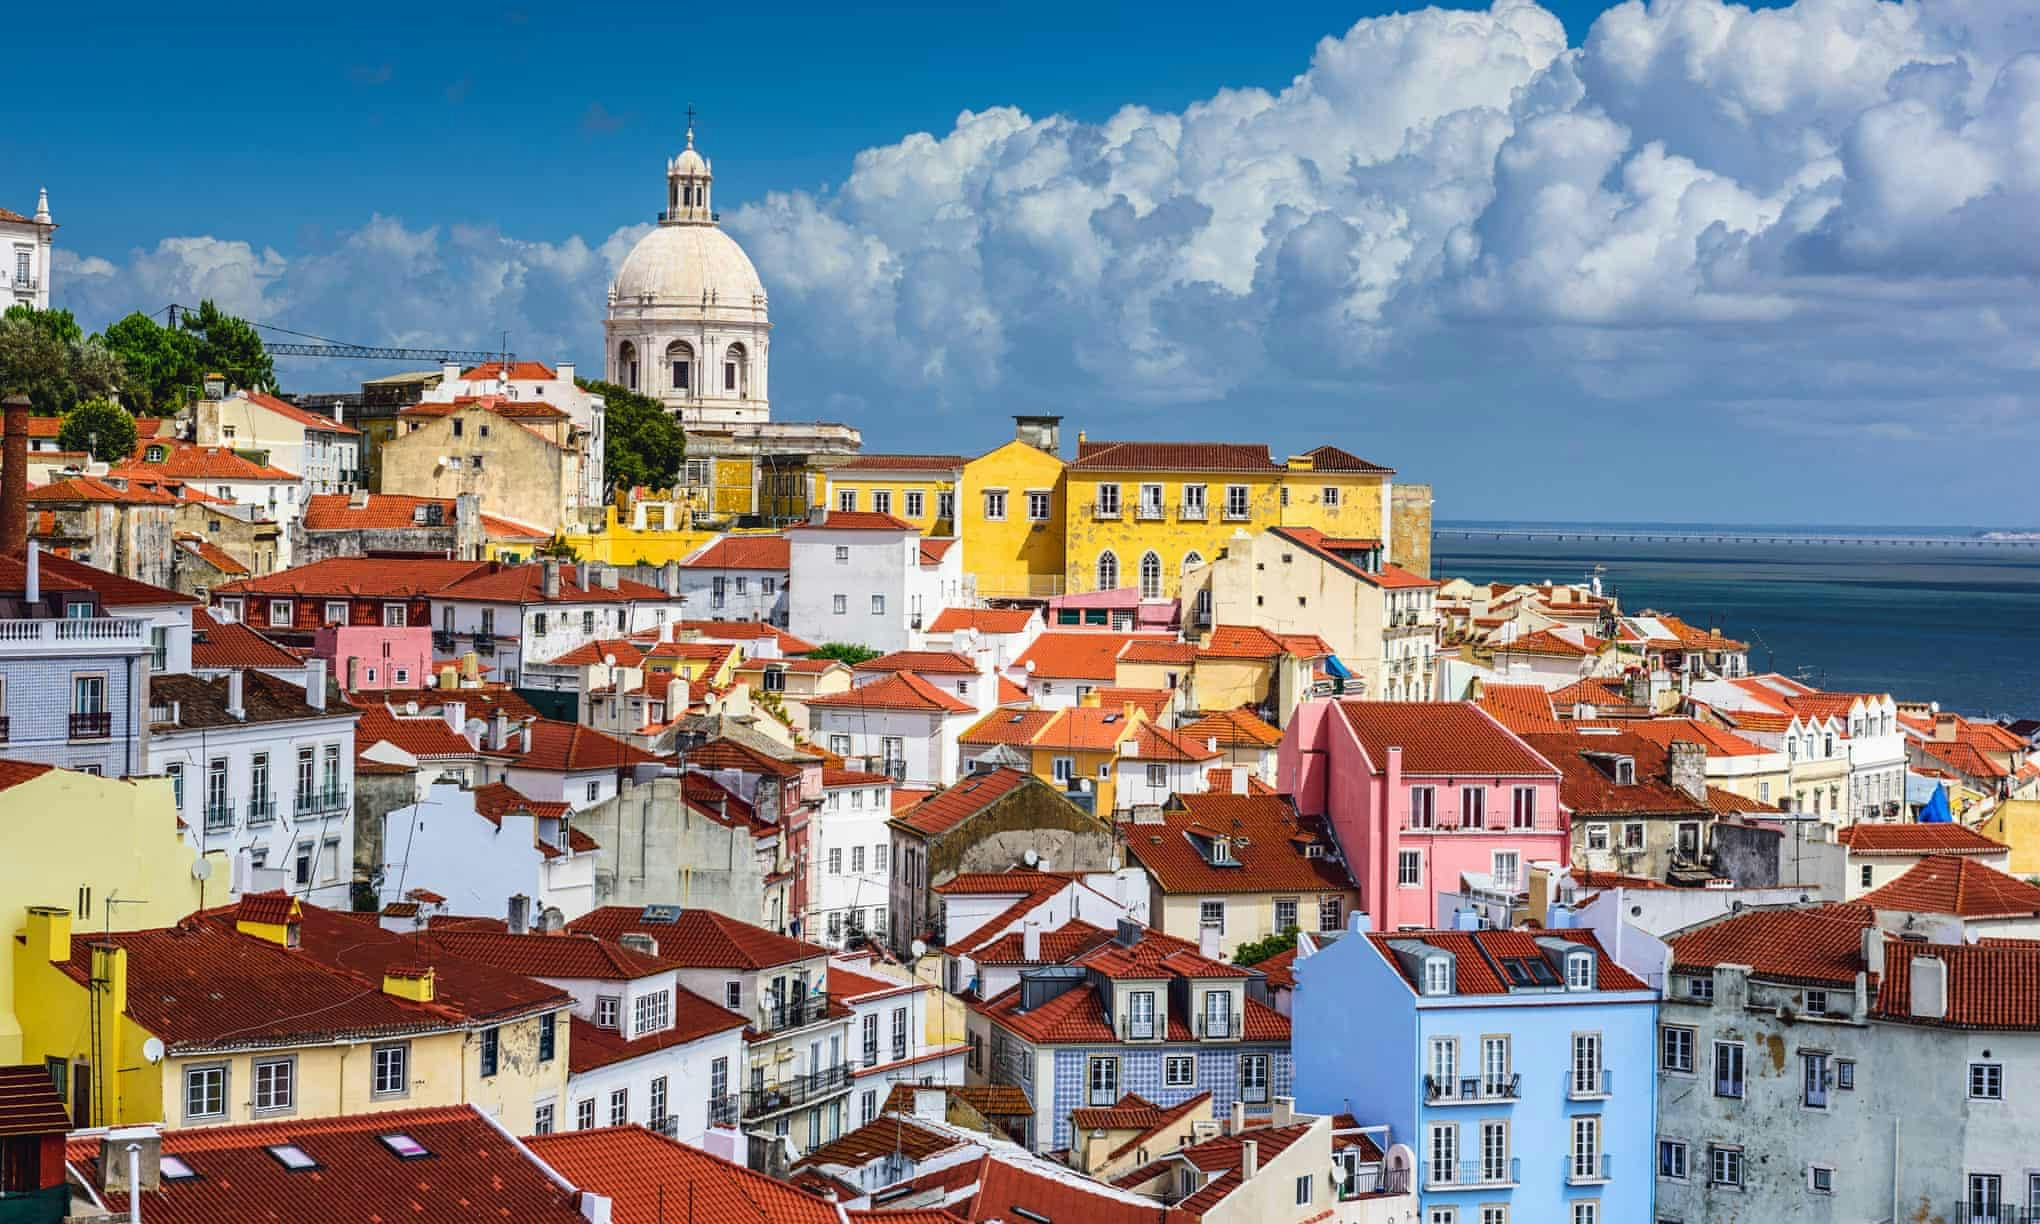 Overlooking the city of Lisbon, Portugal